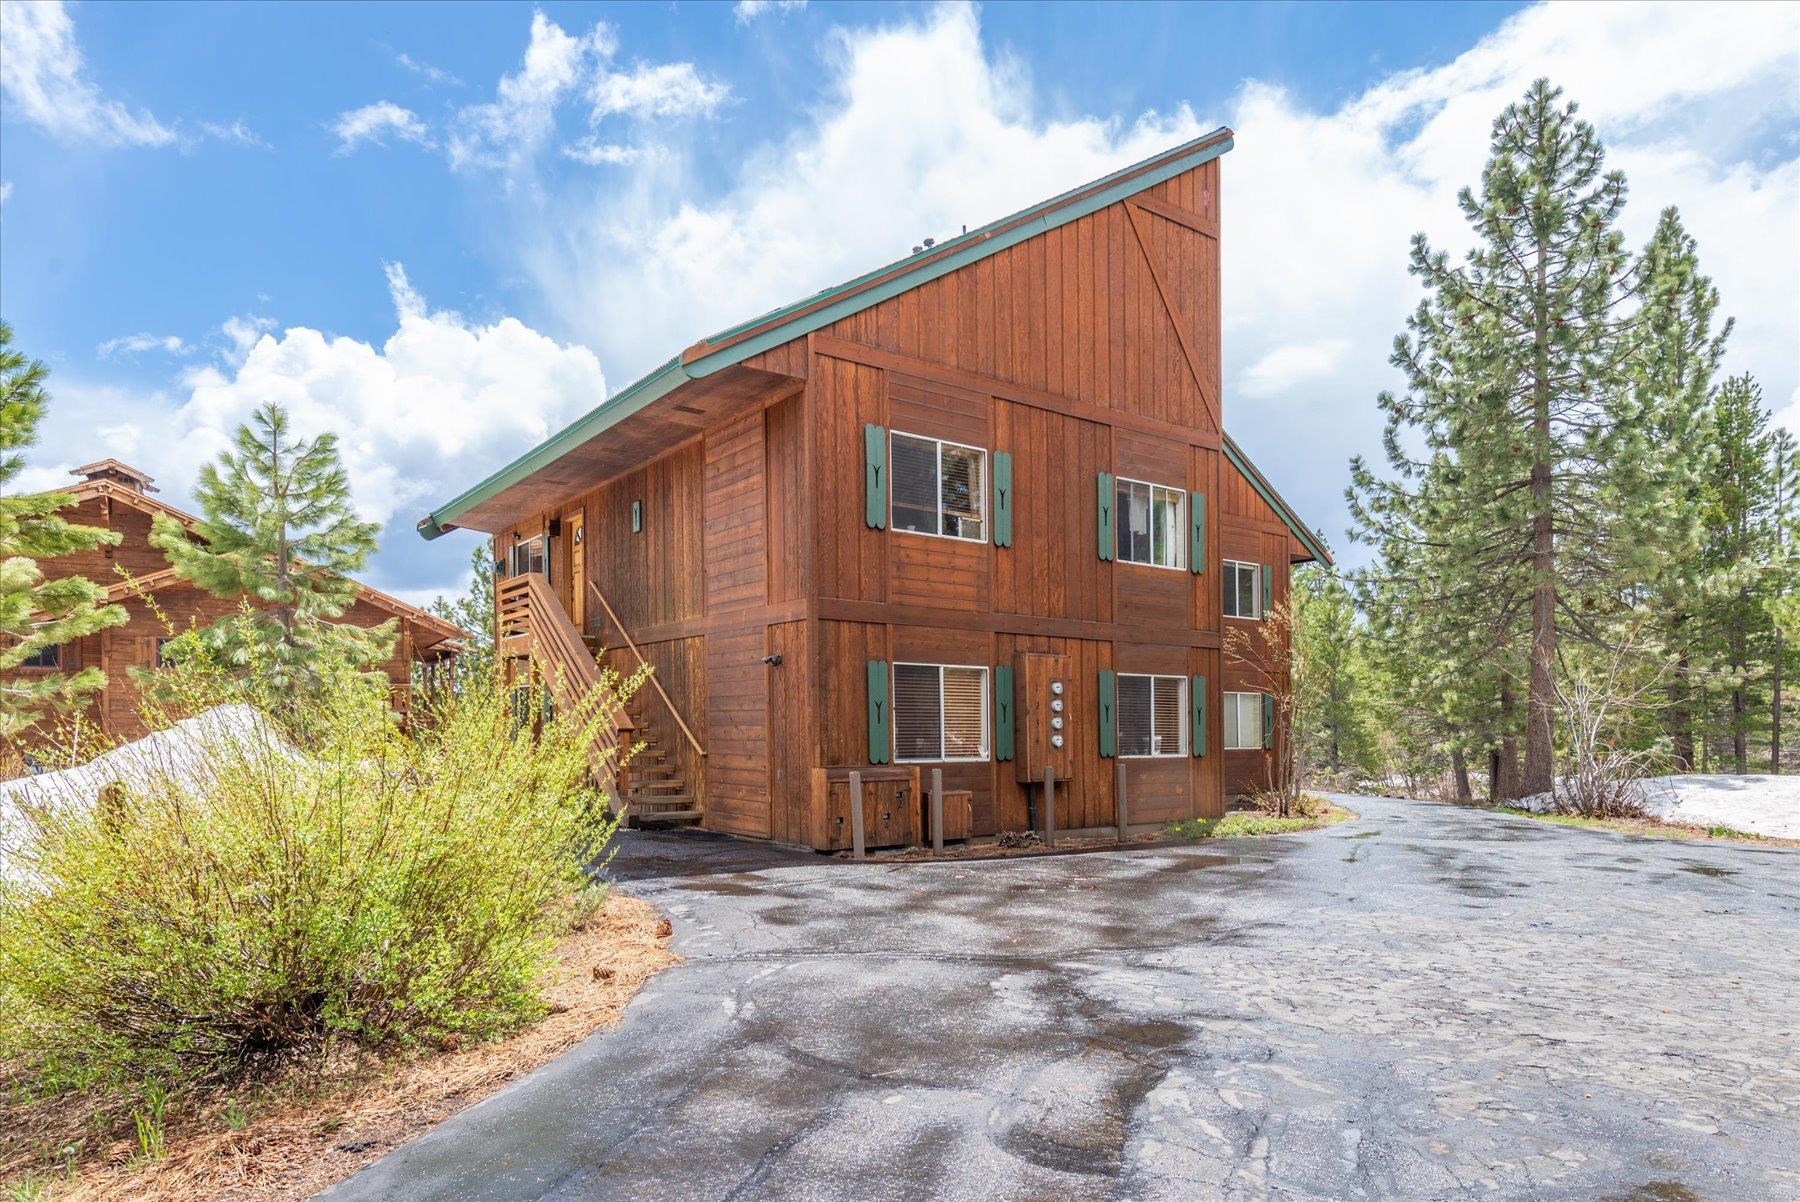 Image for 16695 Skislope Way, Truckee, CA 96161-0000